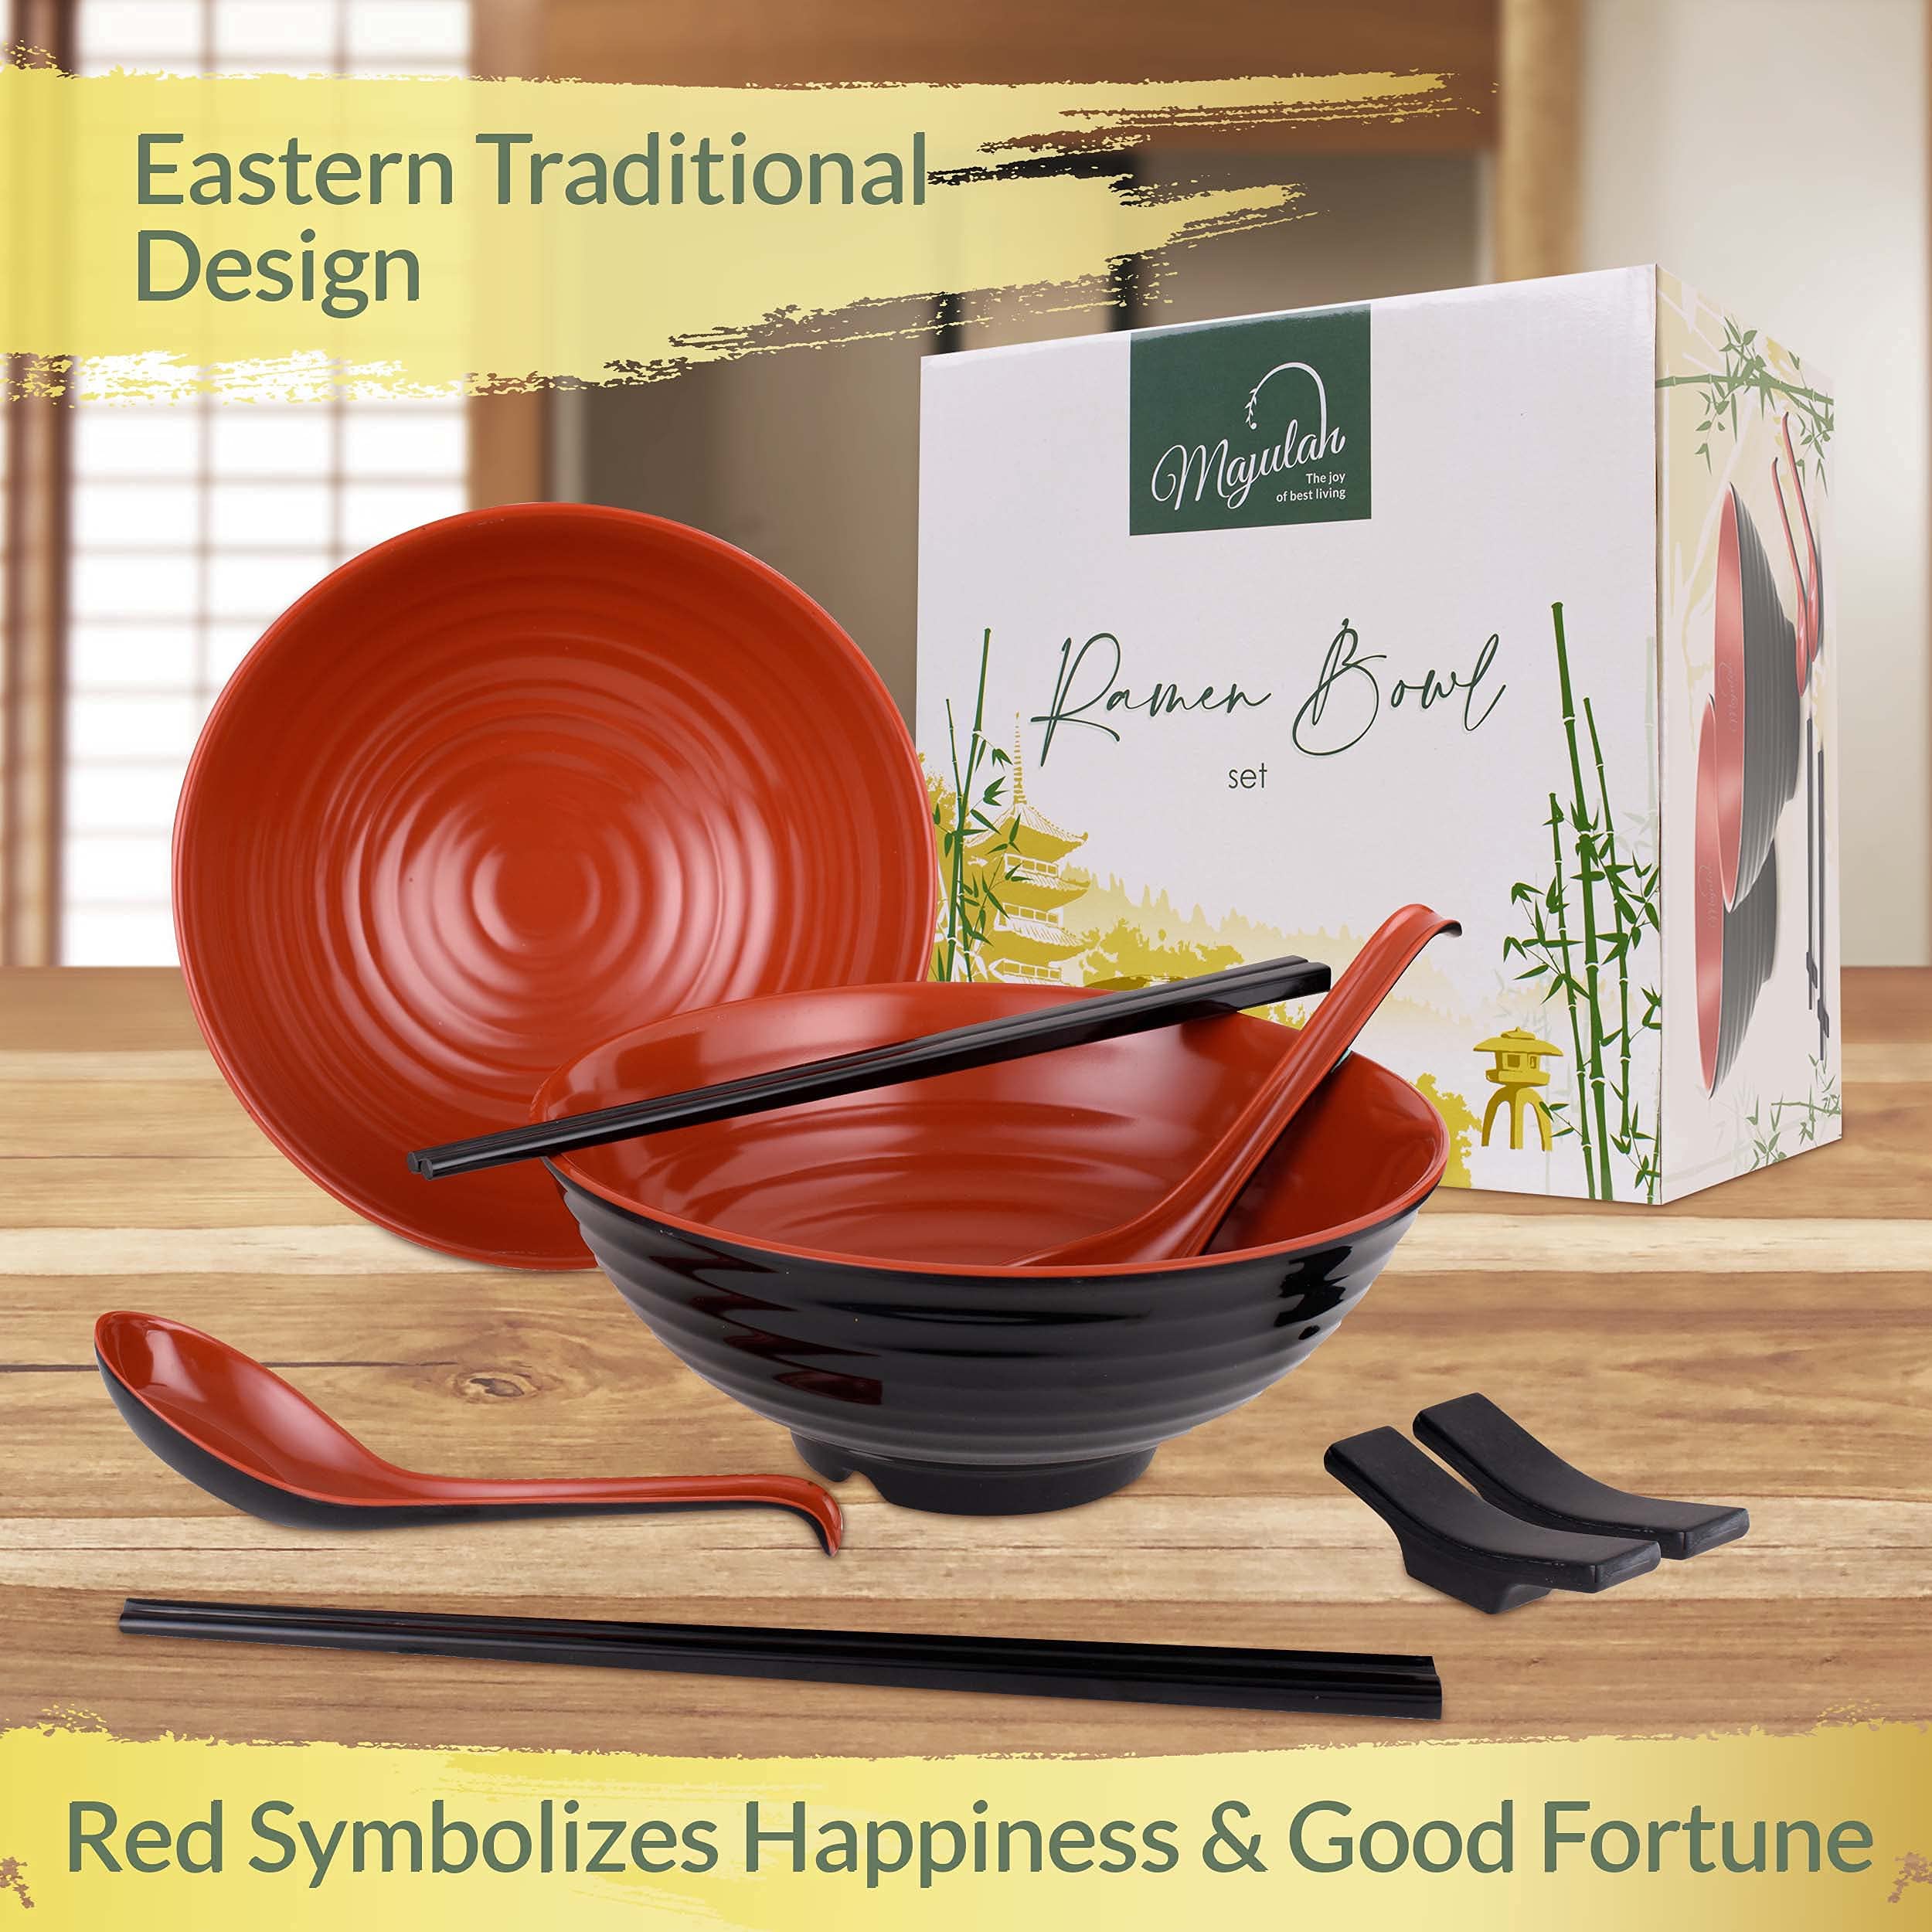 Ramen Bowl Set - 8 Piece Set with 37oz Melamine Bowls, Spoons, Chopsticks & Stand, Durable & Easy to Clean Ramen Bowl, Great for Ramen Noodles & Other Asian Food, Ideal Gift for Japanese Food Lovers